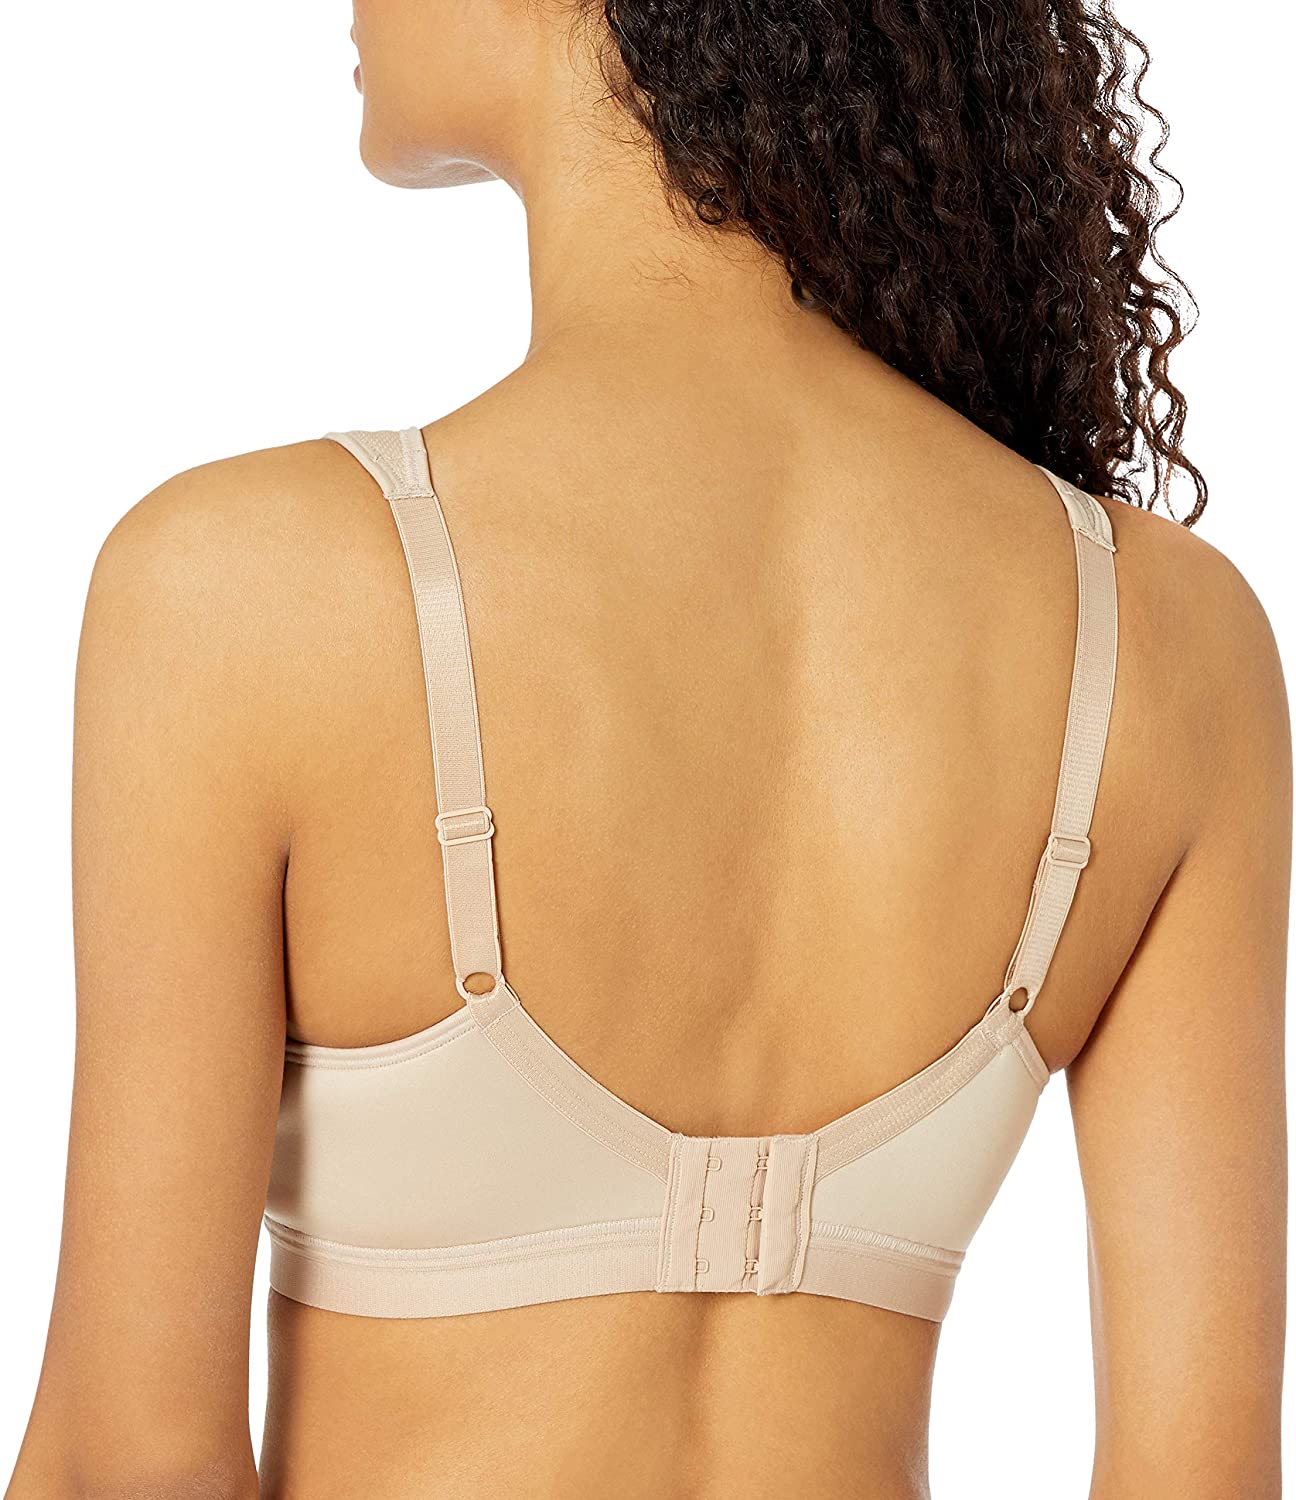 Playtex Womens 18 Hour Active Lifestyle Full Coverage Bra 4159 